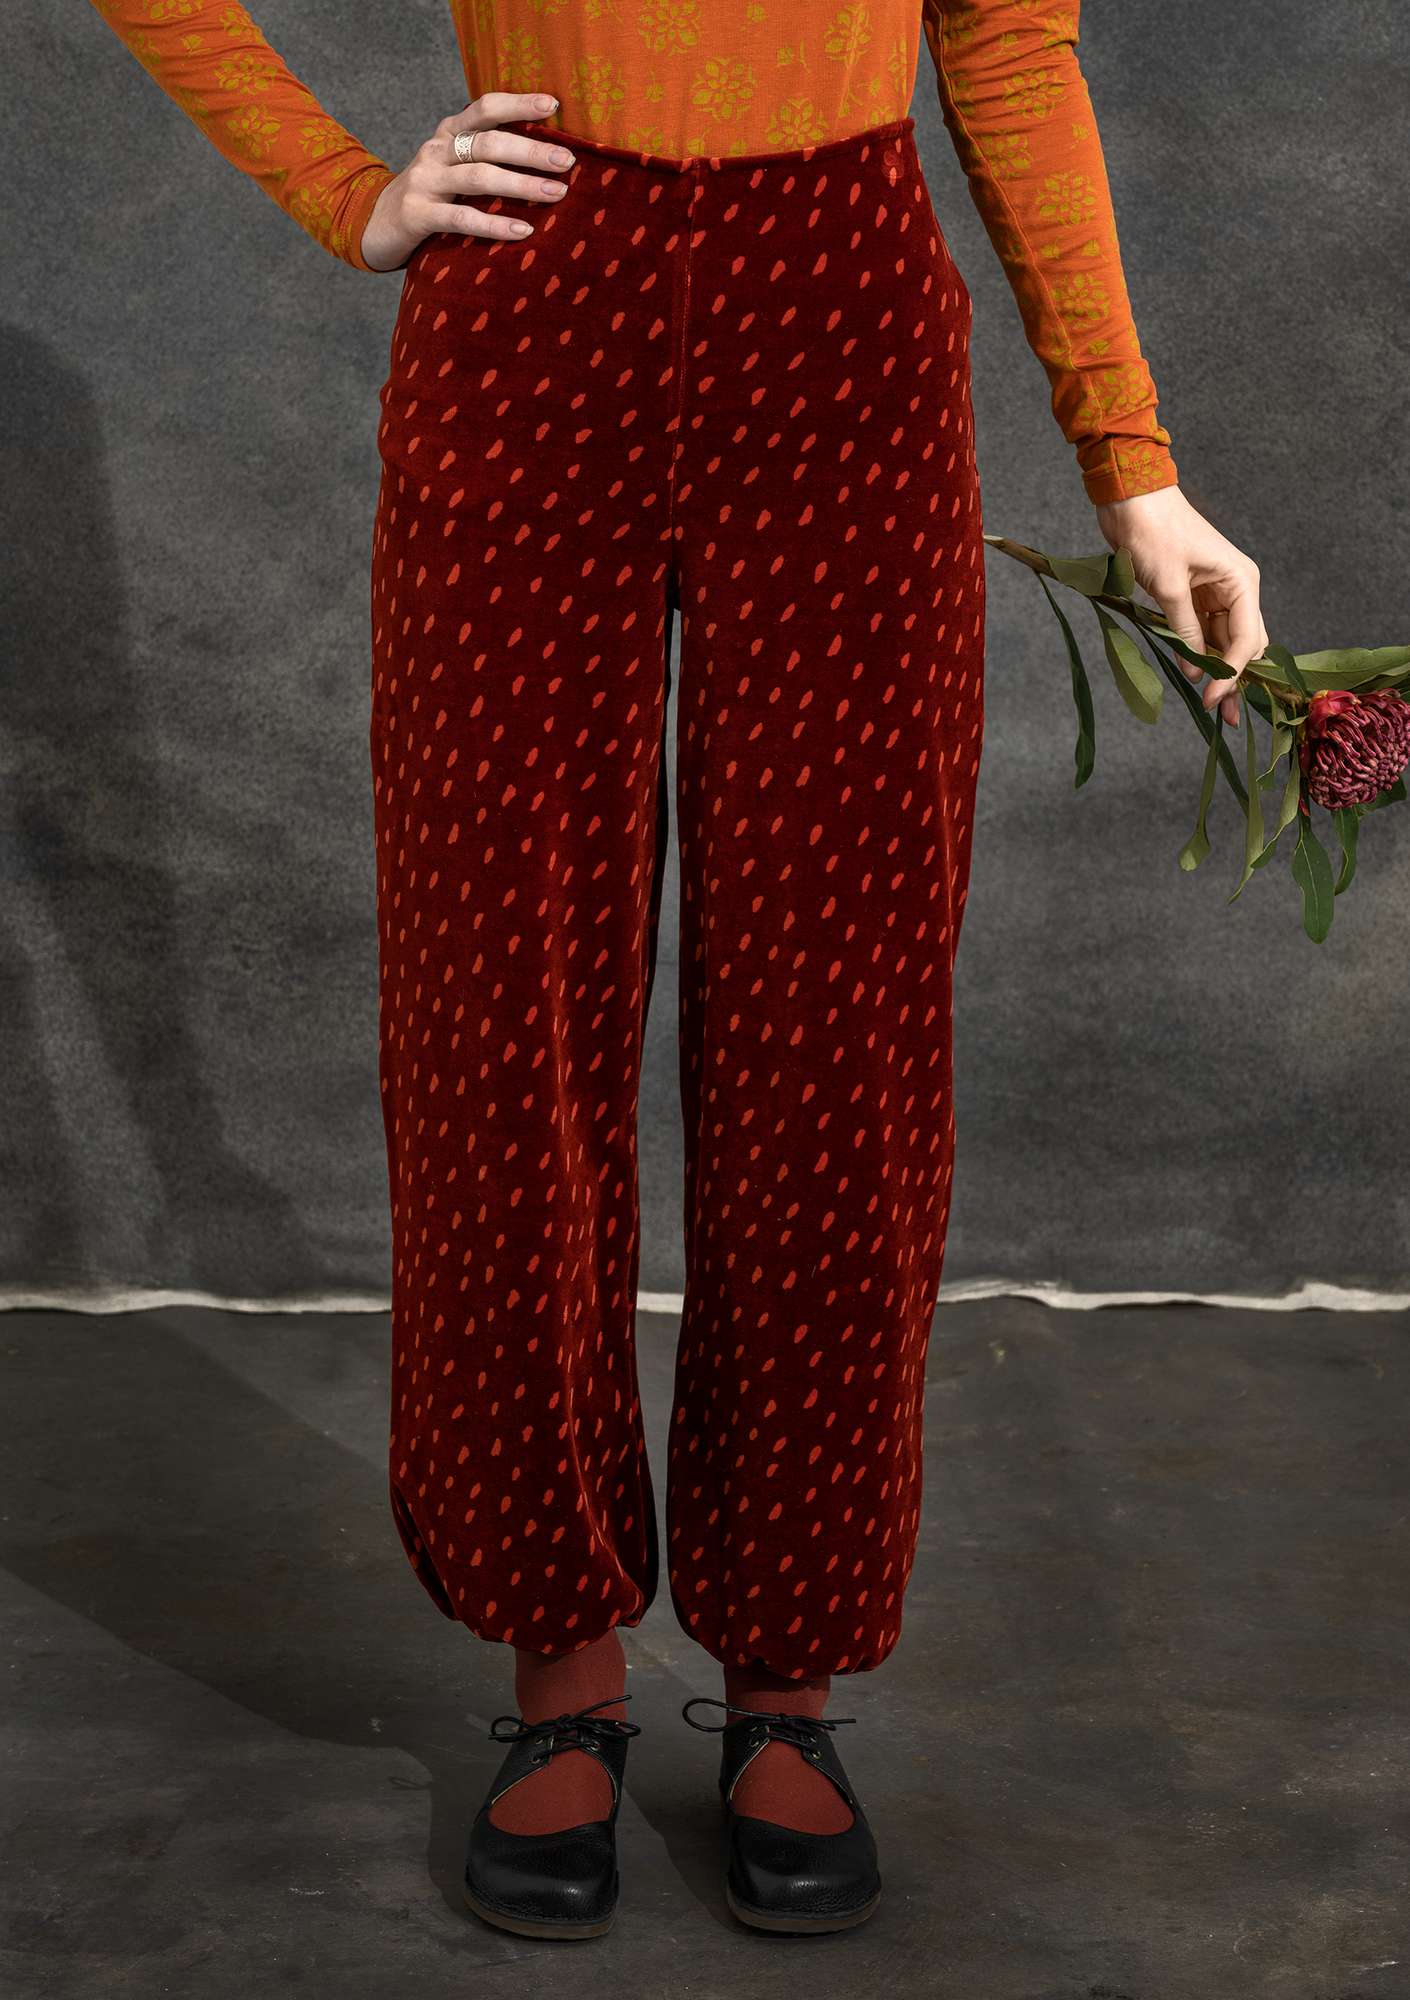 “Fauna” velour trousers in organic cotton/recycled polyester chili/patterned